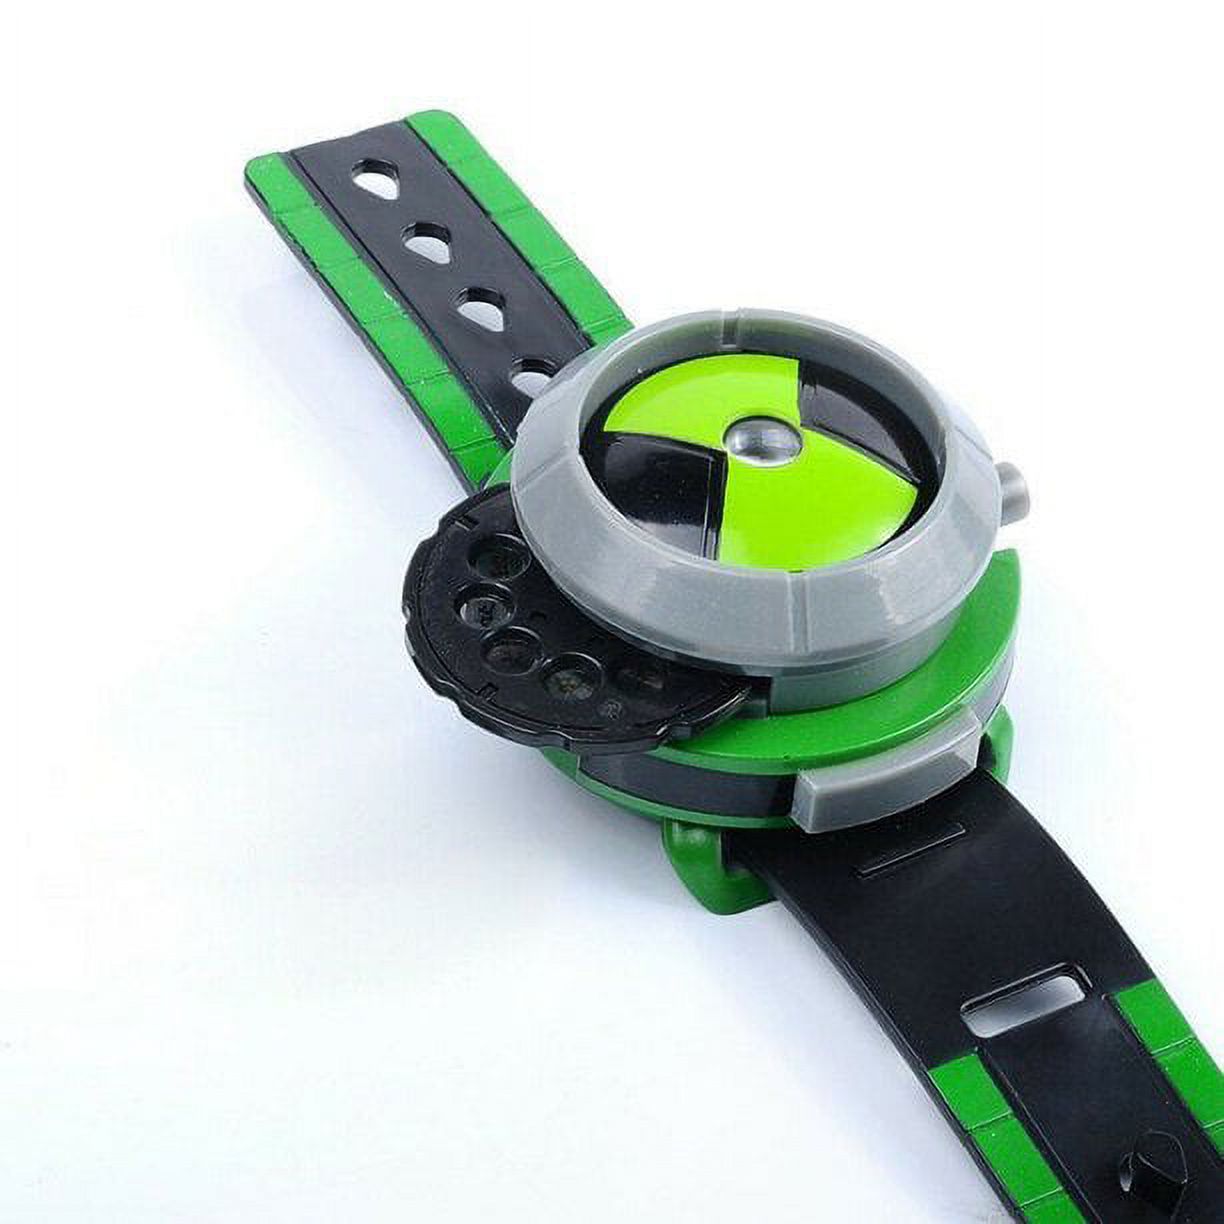 1 pcs Ben 10 Alien Force Omnitrix Illumintator Projector Watch Toy Gift for Child Kids - image 4 of 5